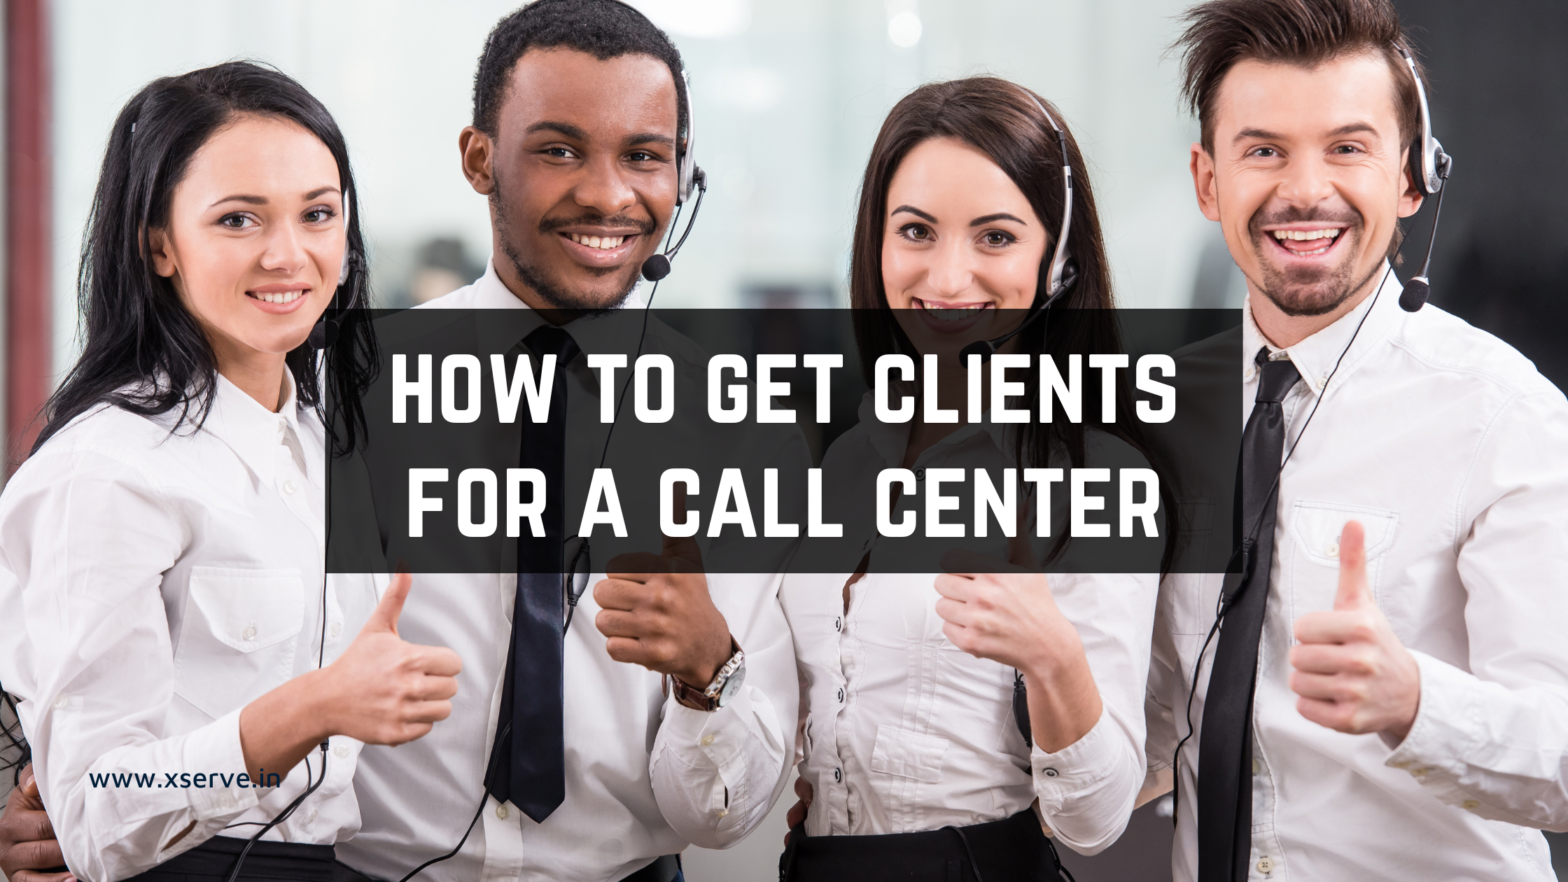 How to get clients for a small call center?